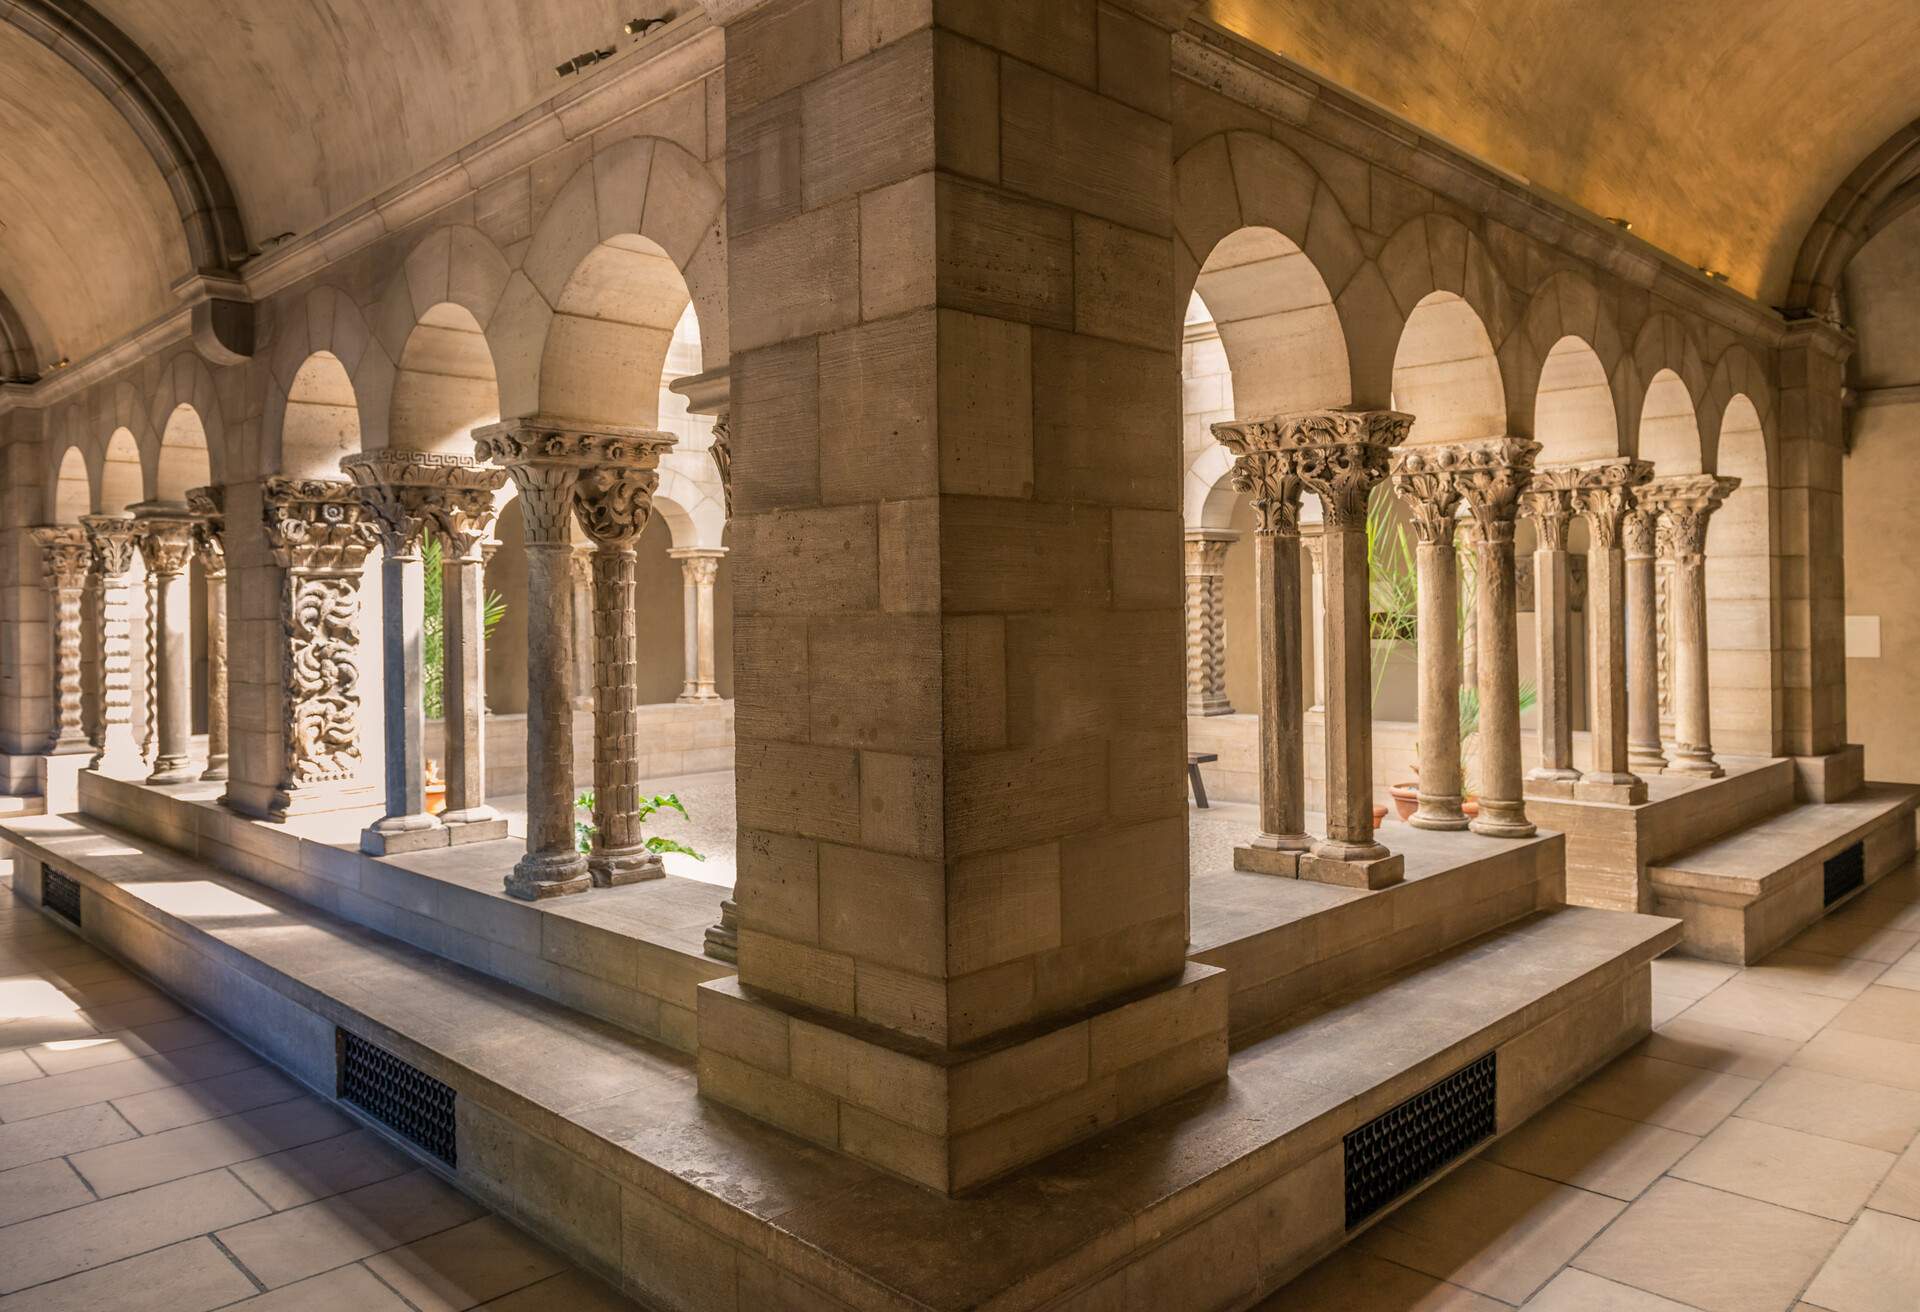 DEST_USA_NEW YORK_NEW YORK CITY_THE CLOISTERS_GettyImages-511664781